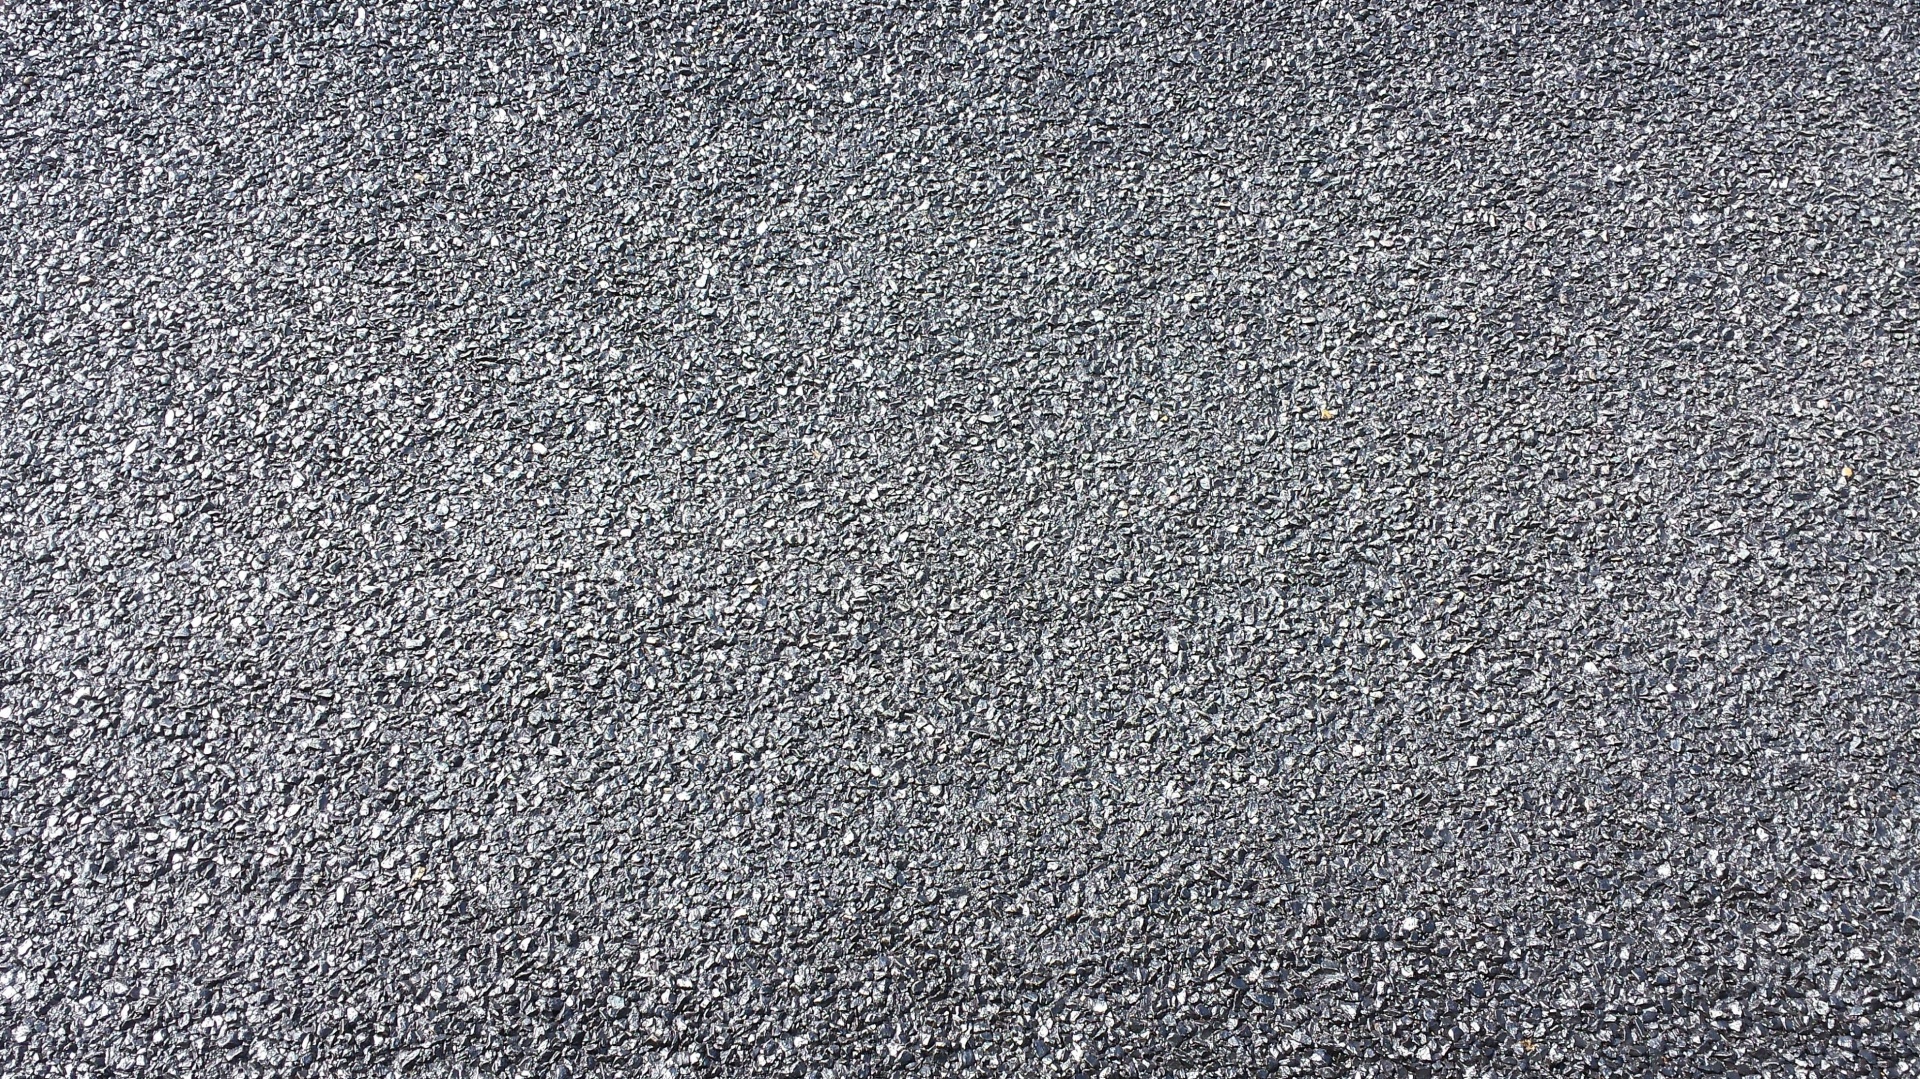 A close-up of a newly resurfaced road